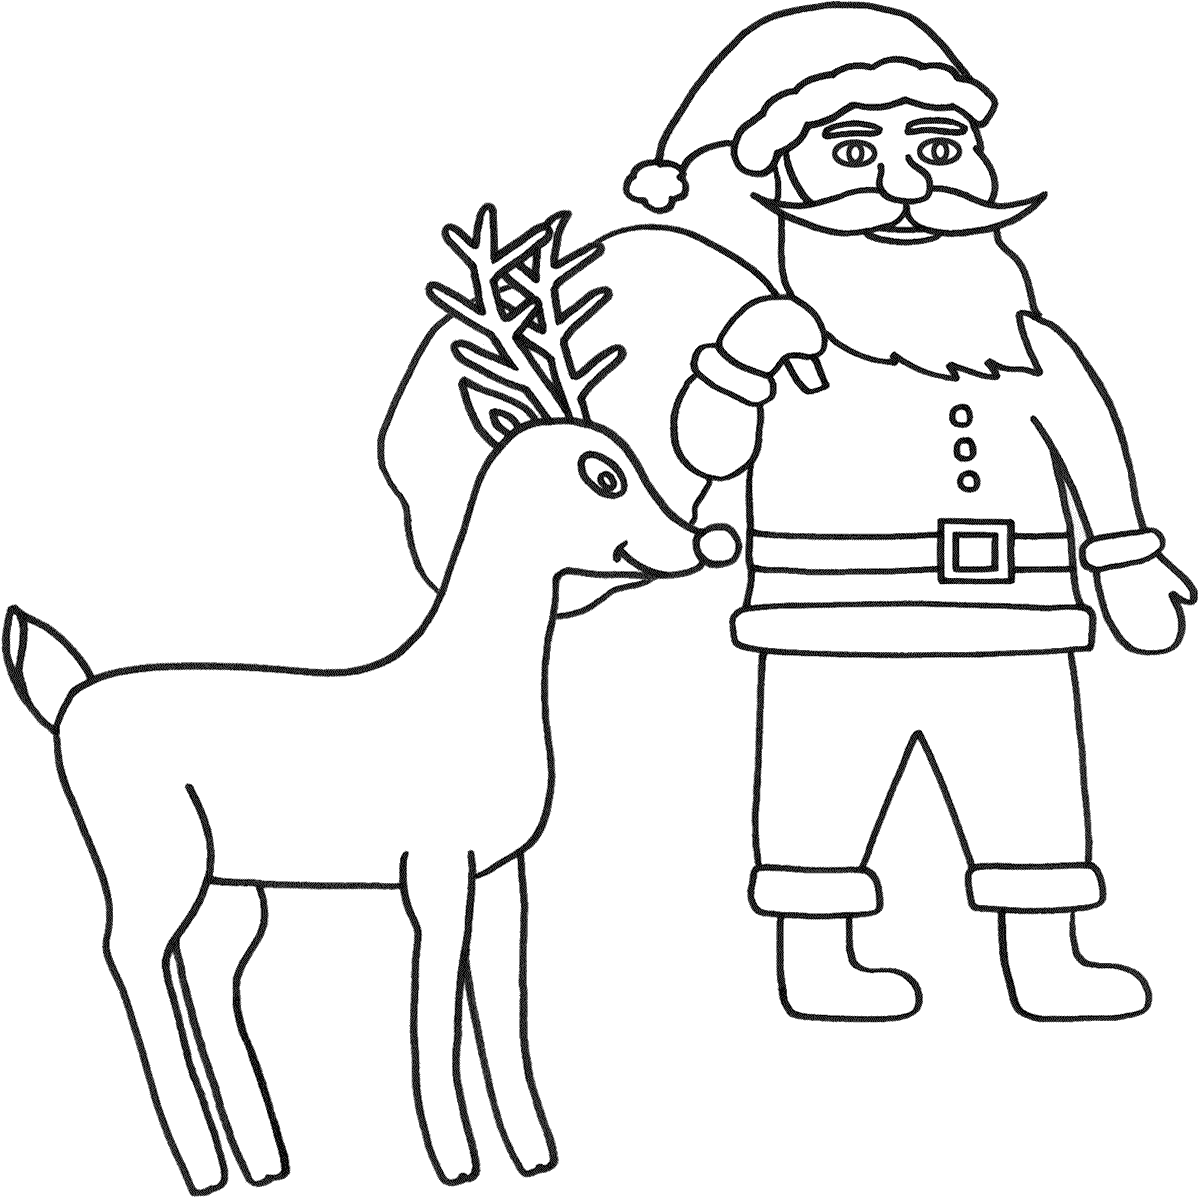 Santa Claus And Deer Coloring Page - Christmas Coloring Pages ...